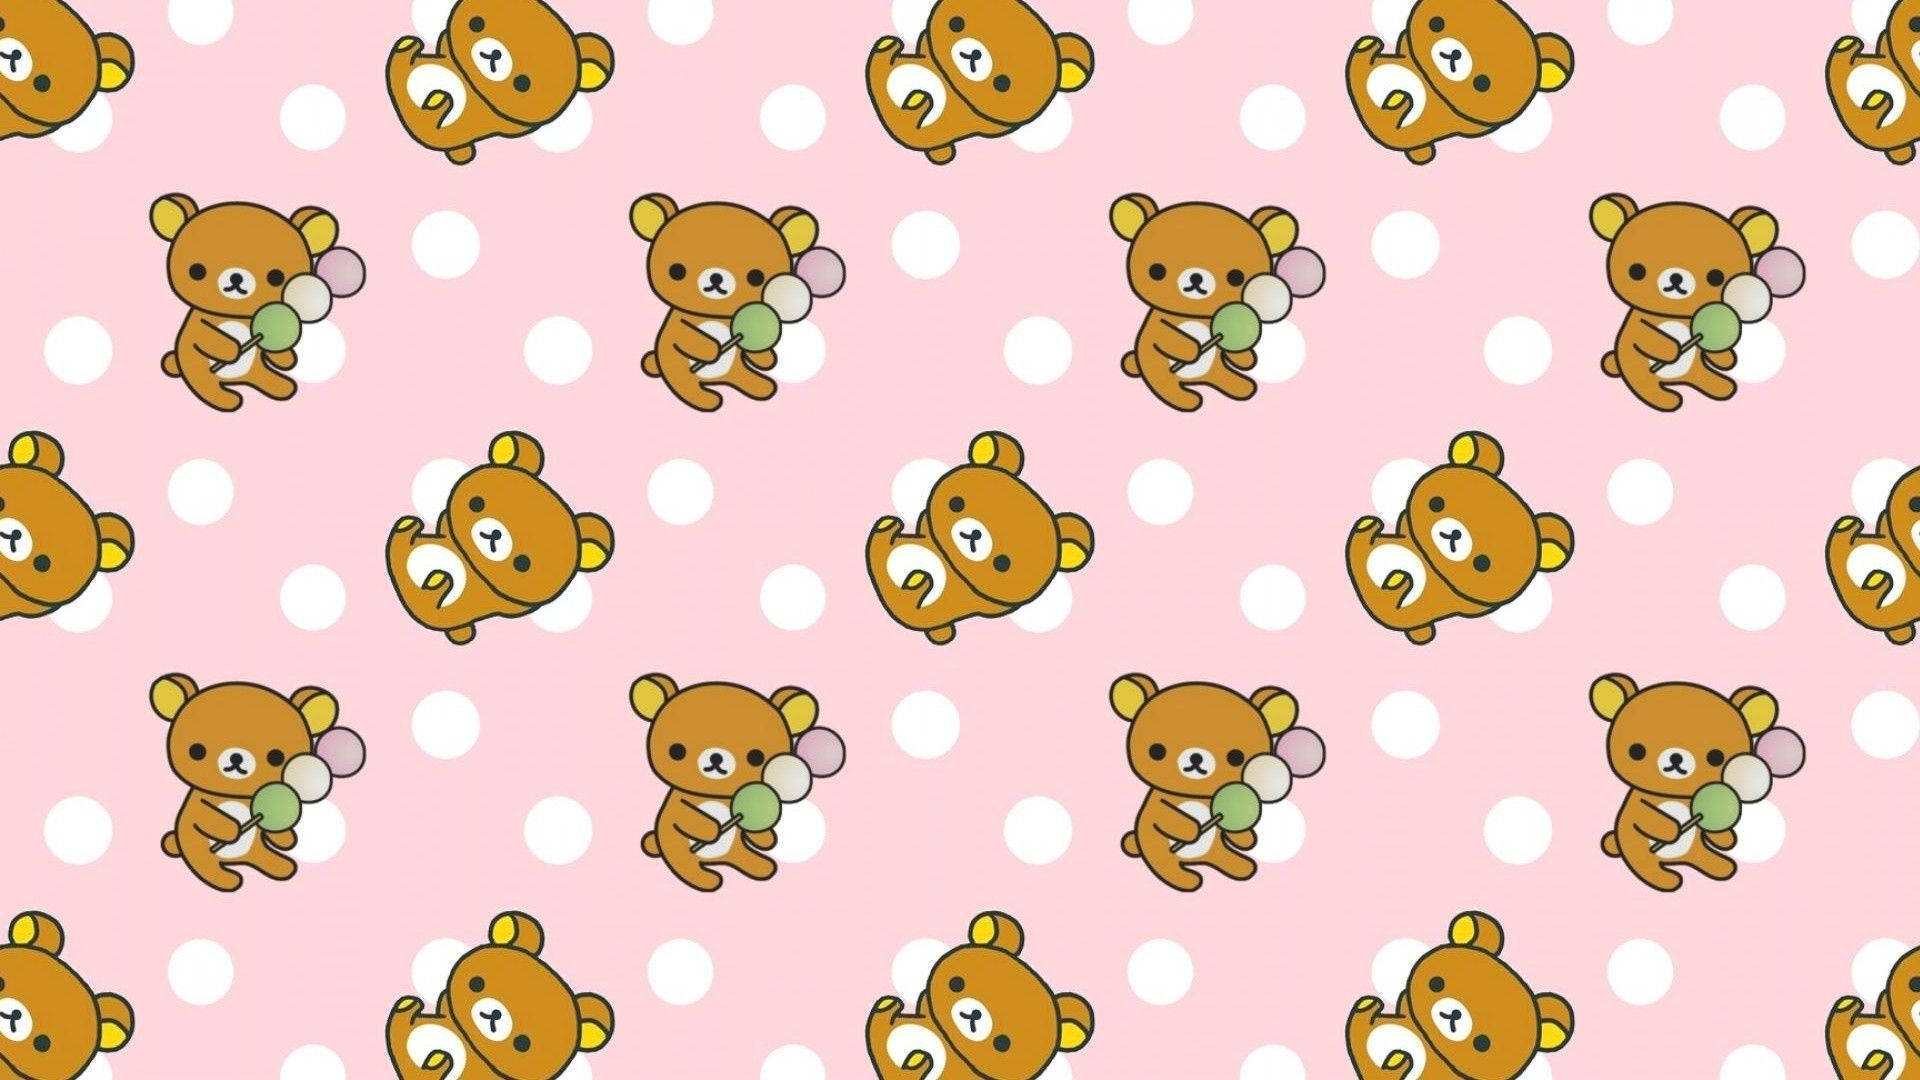 100+] Cute Tablet Background s | Wallpapers.com